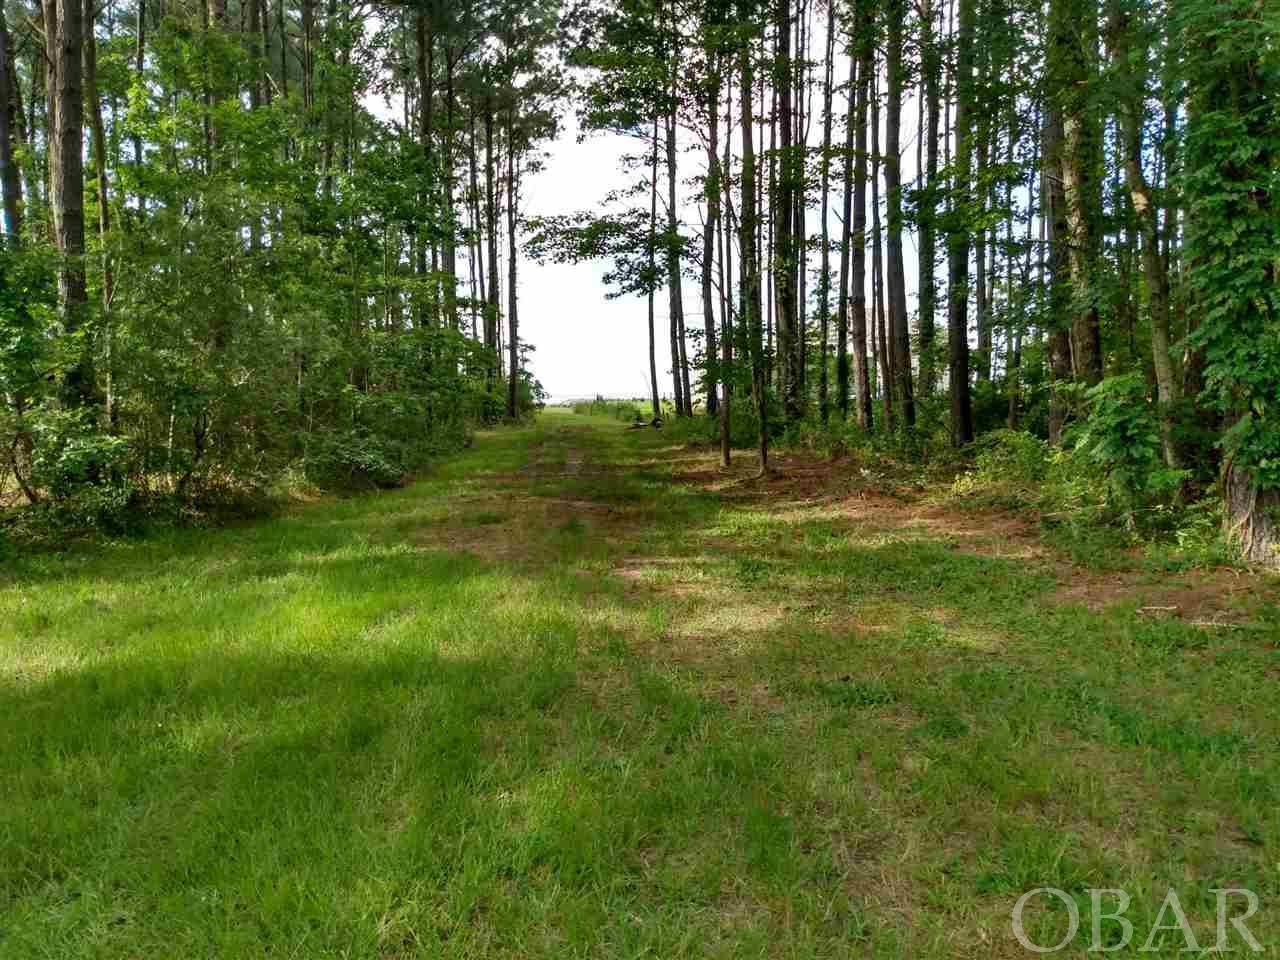 PARTIALLY WOODED WATERFRONT LOT ON ALBEMARLE SOUND This property offers the ultimate privacy on the water in the Columbia, N.C. area. It has rip rap shoreline stabilization structure. There is a RV camper on the property that conveys. Electrical, septic system and county water supply on property. No  HOA. Private path to the shore.  Excellent site  for weekend stays and a new home! Gorgeous water views and sunsets! Within minutes of Nags Head, N.C. Priced to sell!